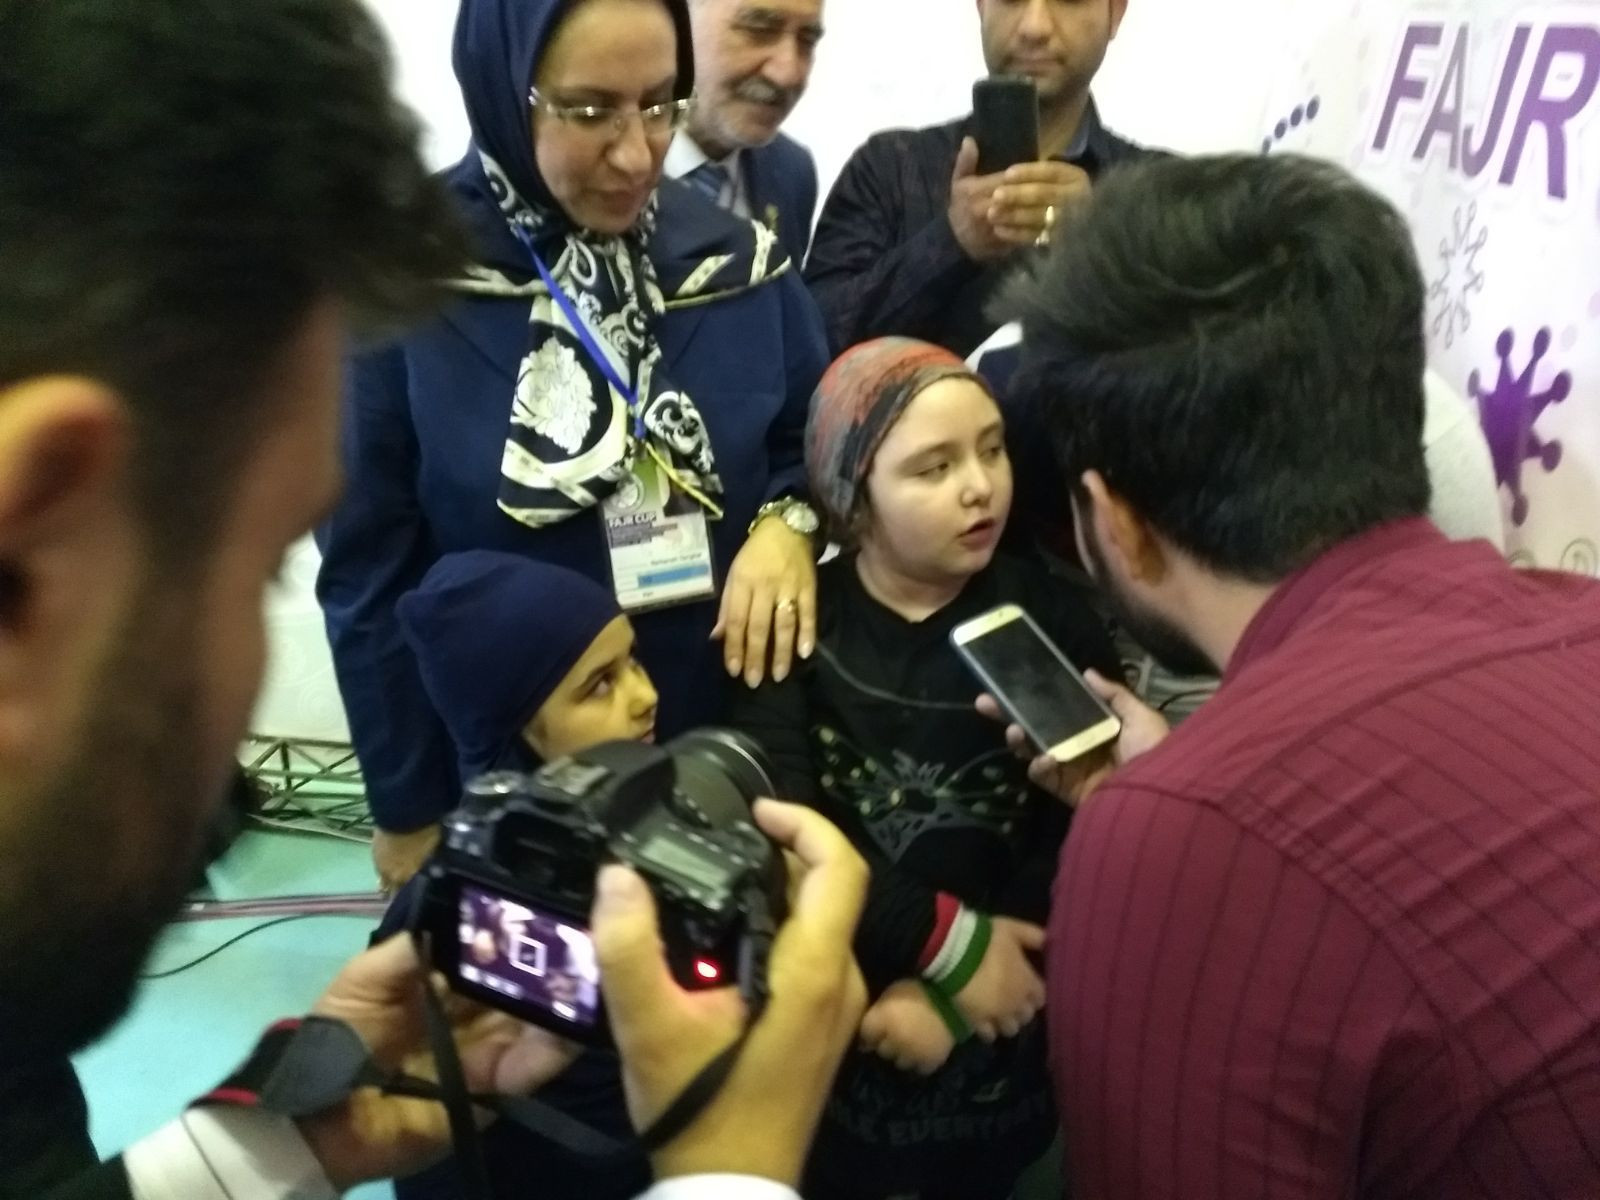 An eight-year-old girl made history in 2018 by becoming the first female to lift a barbell in public in Iran ©Brian Oliver